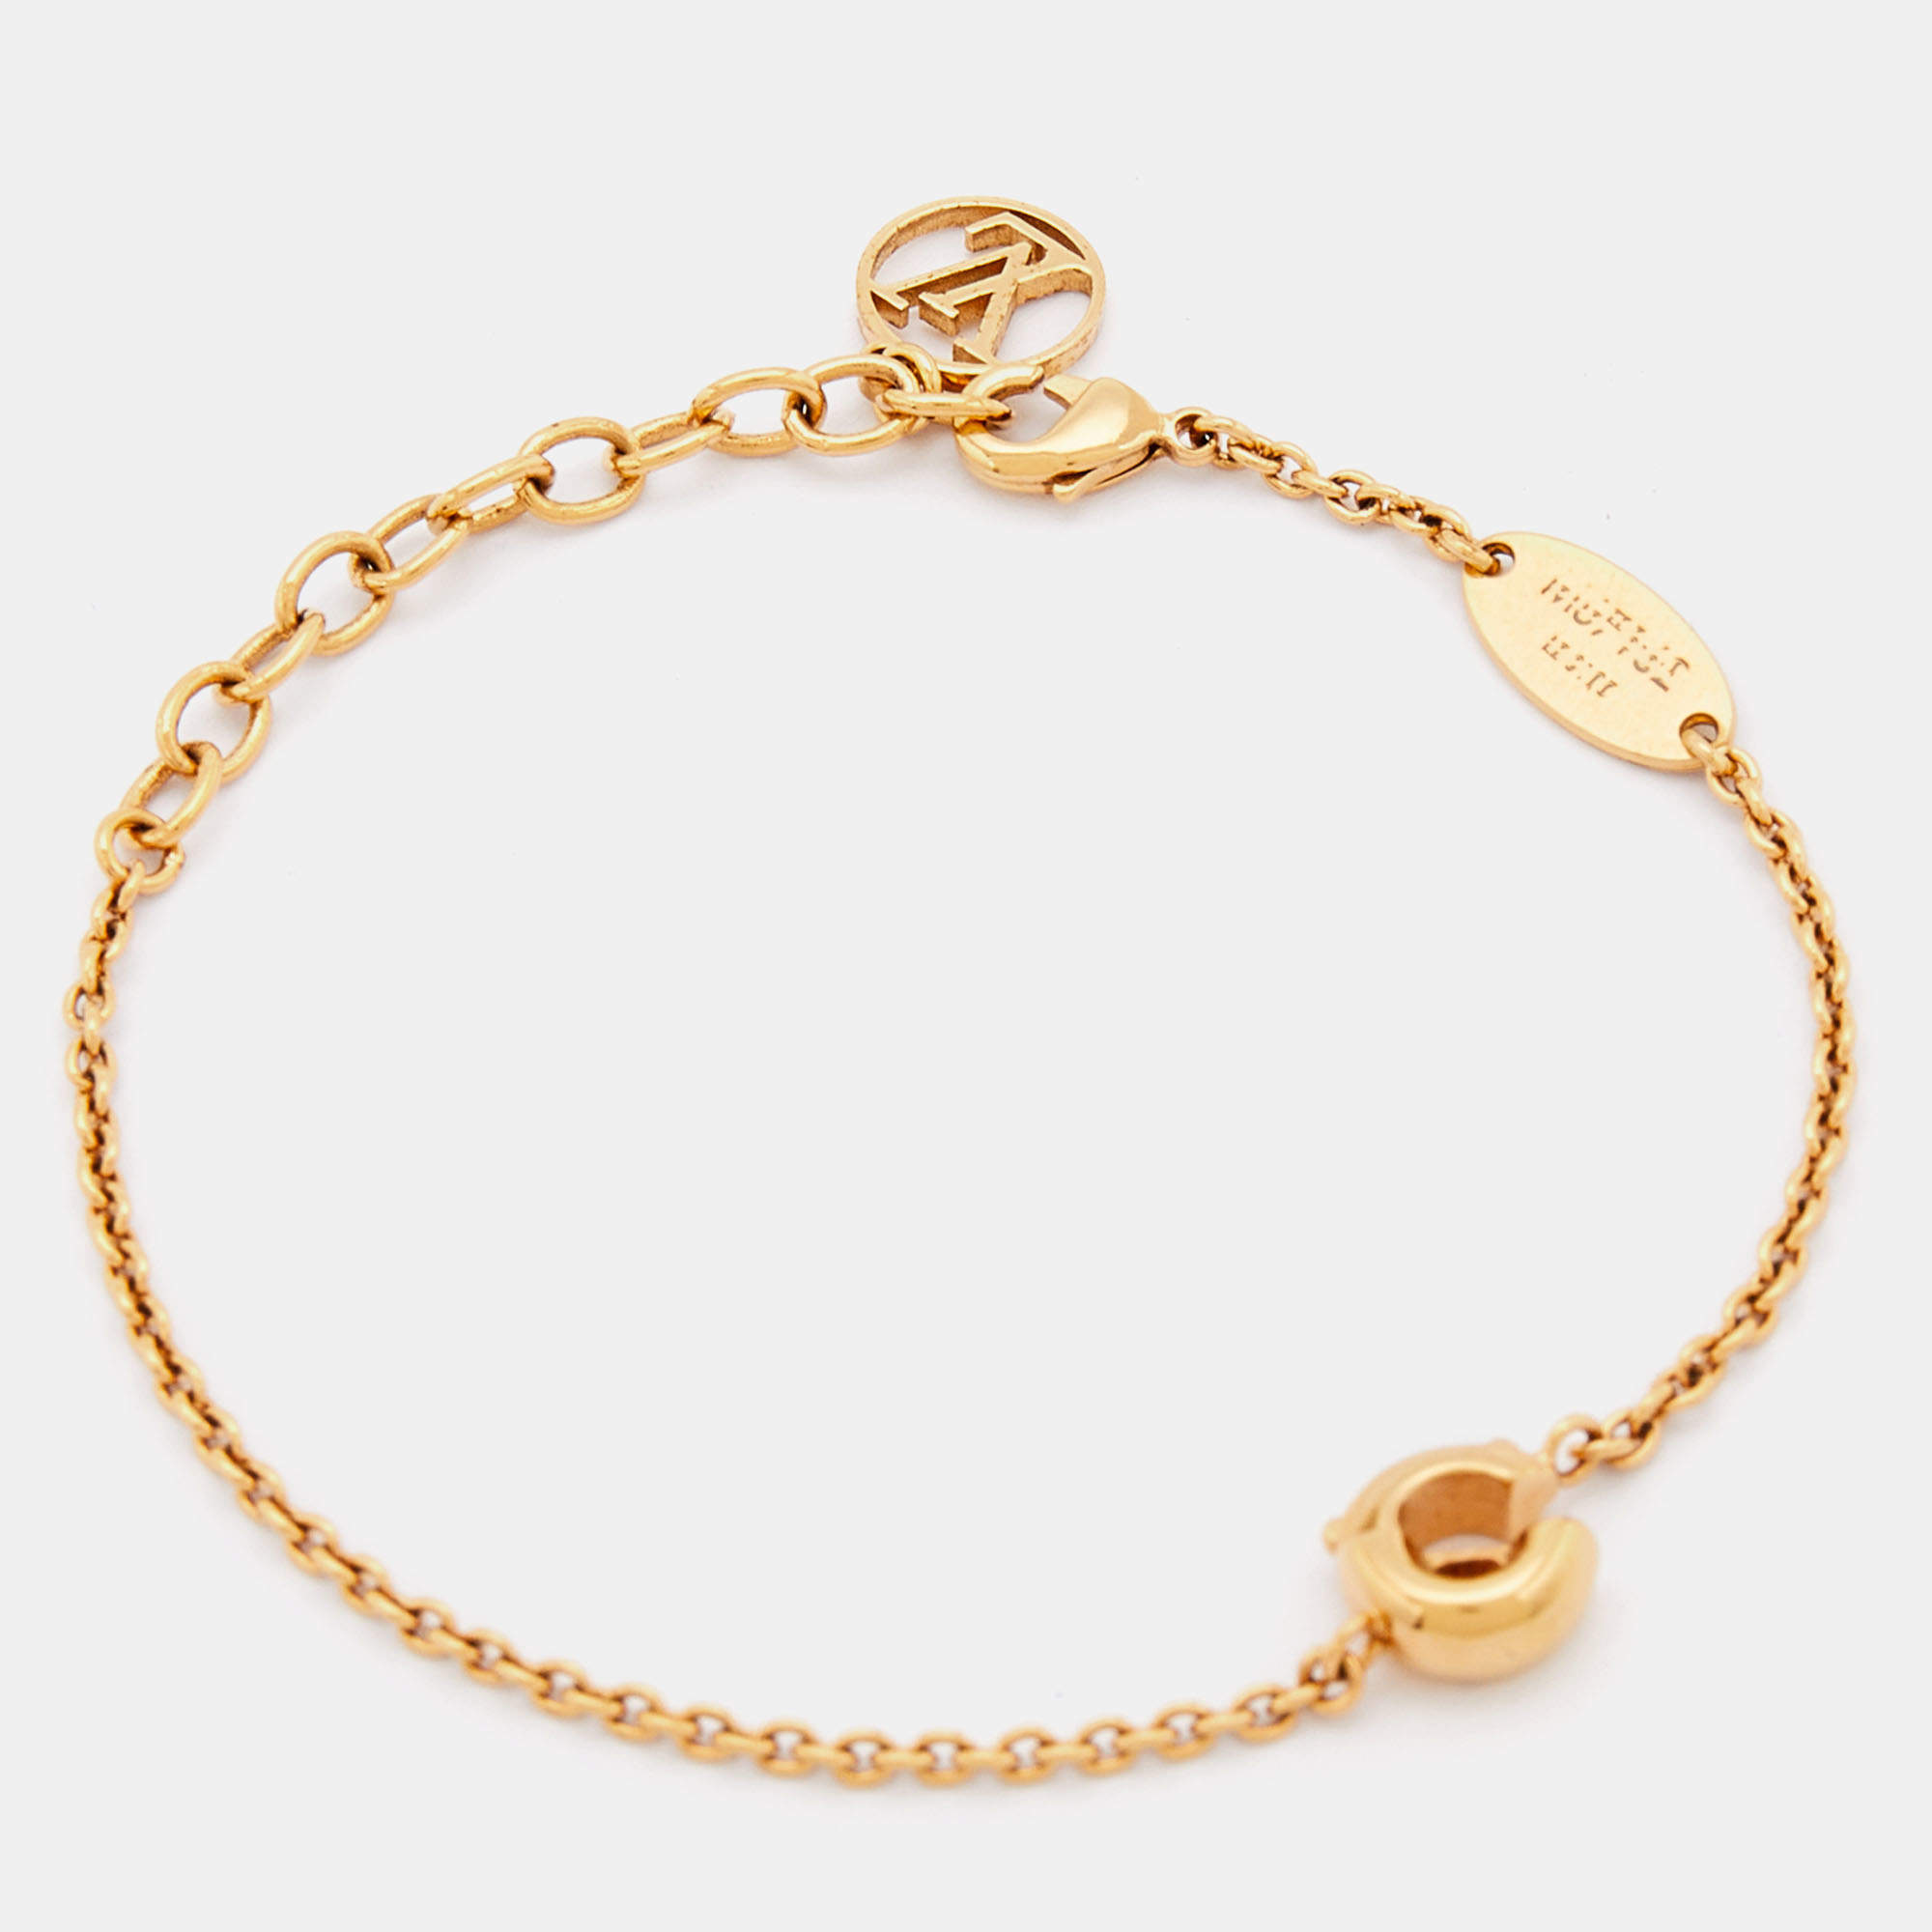 Fmtexclusive - LOUIS VUITTON LV Golden Plated Stainless Steel *kada/Bracelet*  for Men and Women Many other Brands and Colours Available  www.flauntmarket.com +91-9948512000 #hyderabadfashion #hyderabadi  #hyderabadfashionblogger #hyderabaddiaries